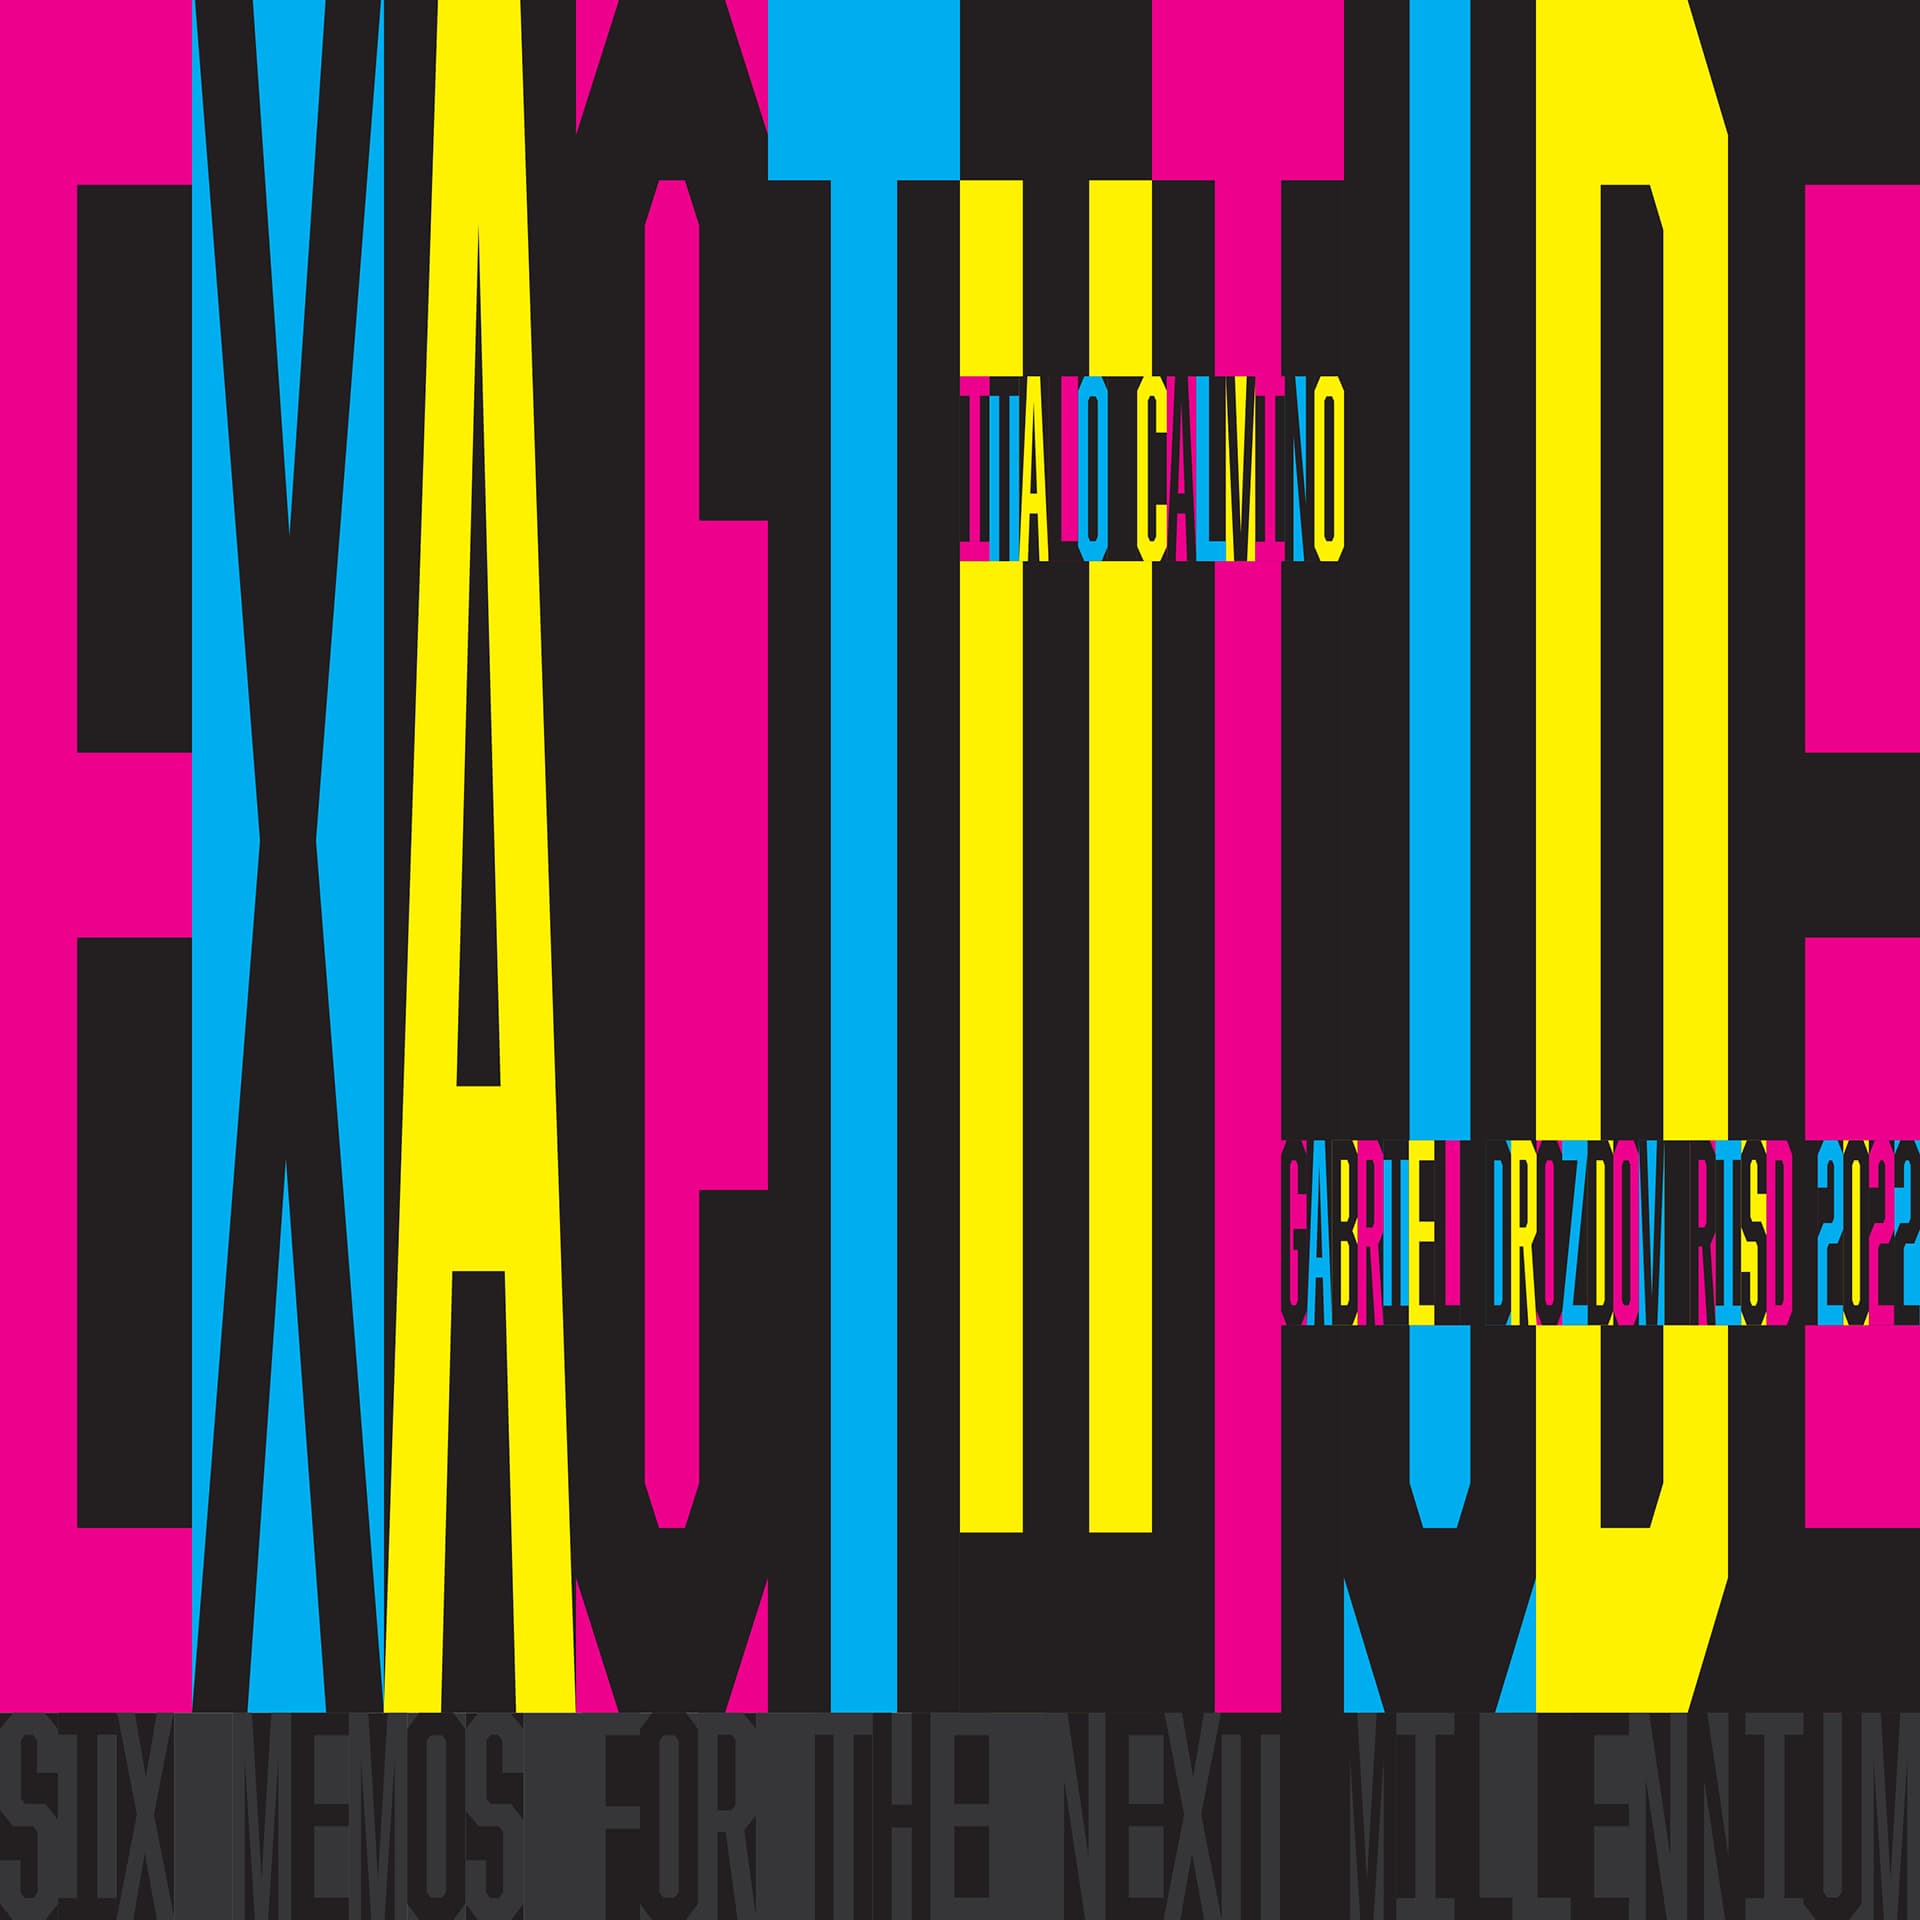 “Exactitude,” using the exact CMYK spectrum and exactly filling up the space